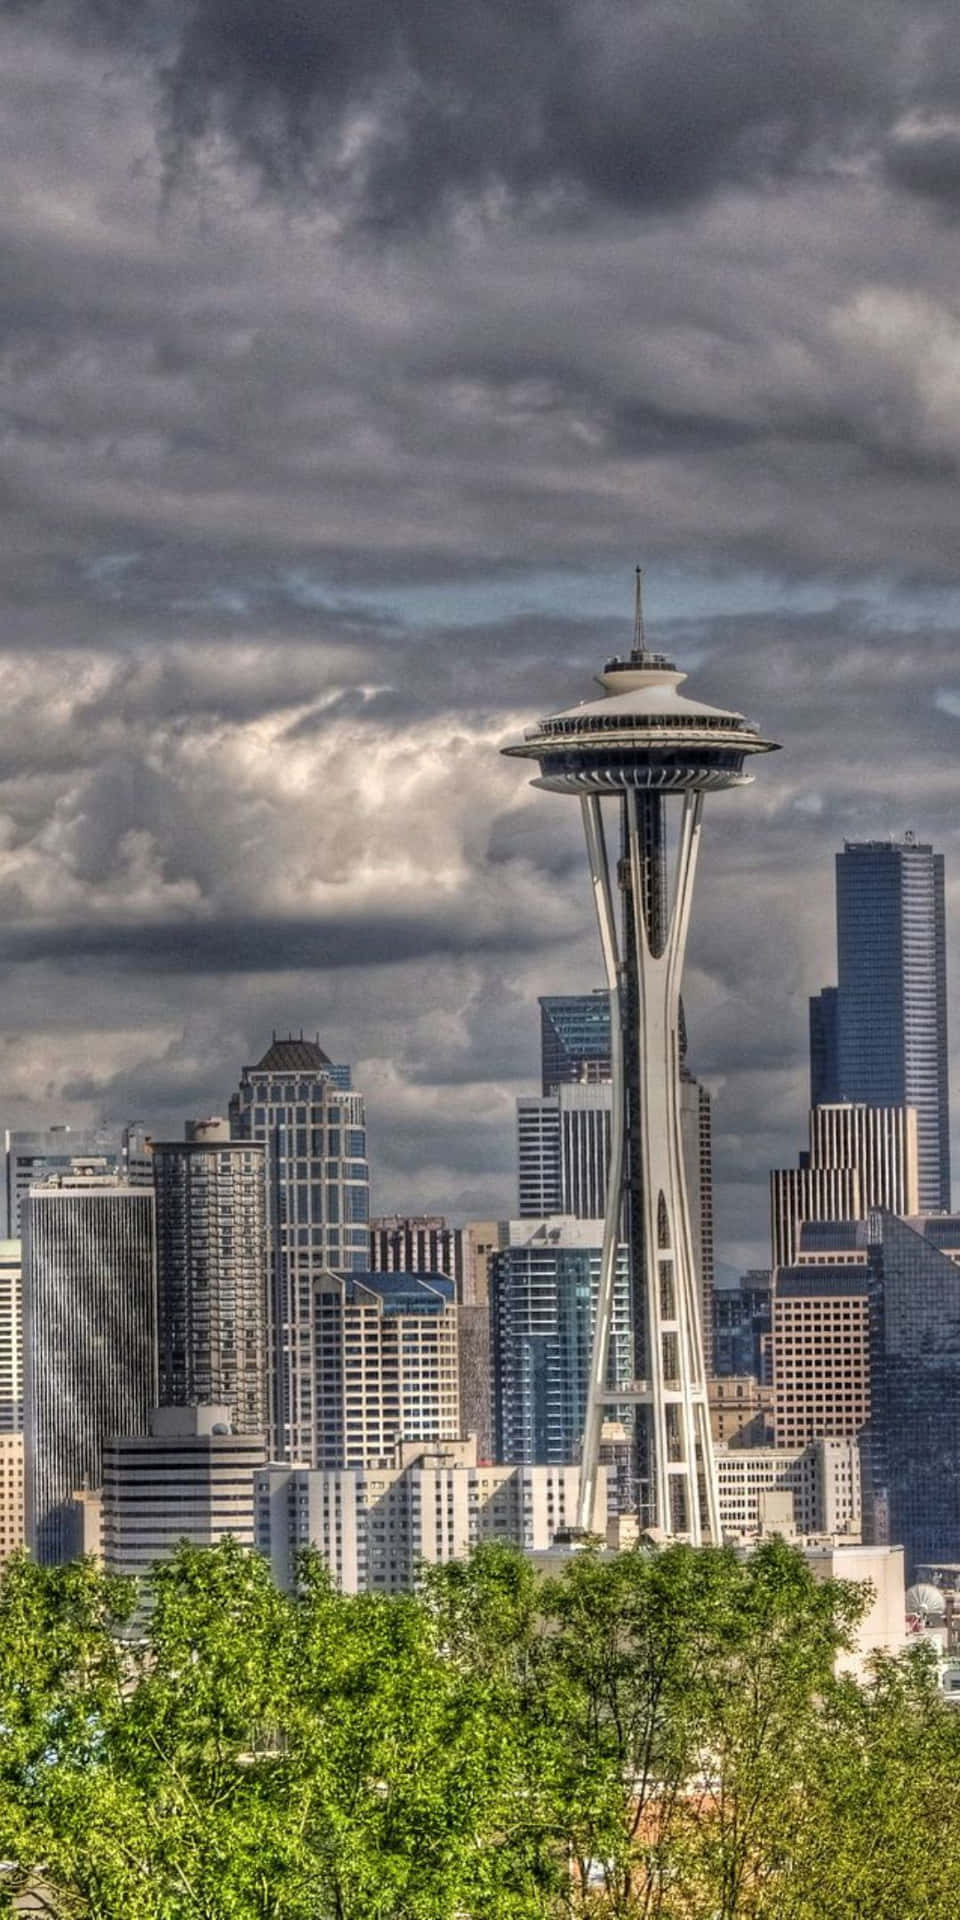 The Space Needle Is Seen In The Background Of A City